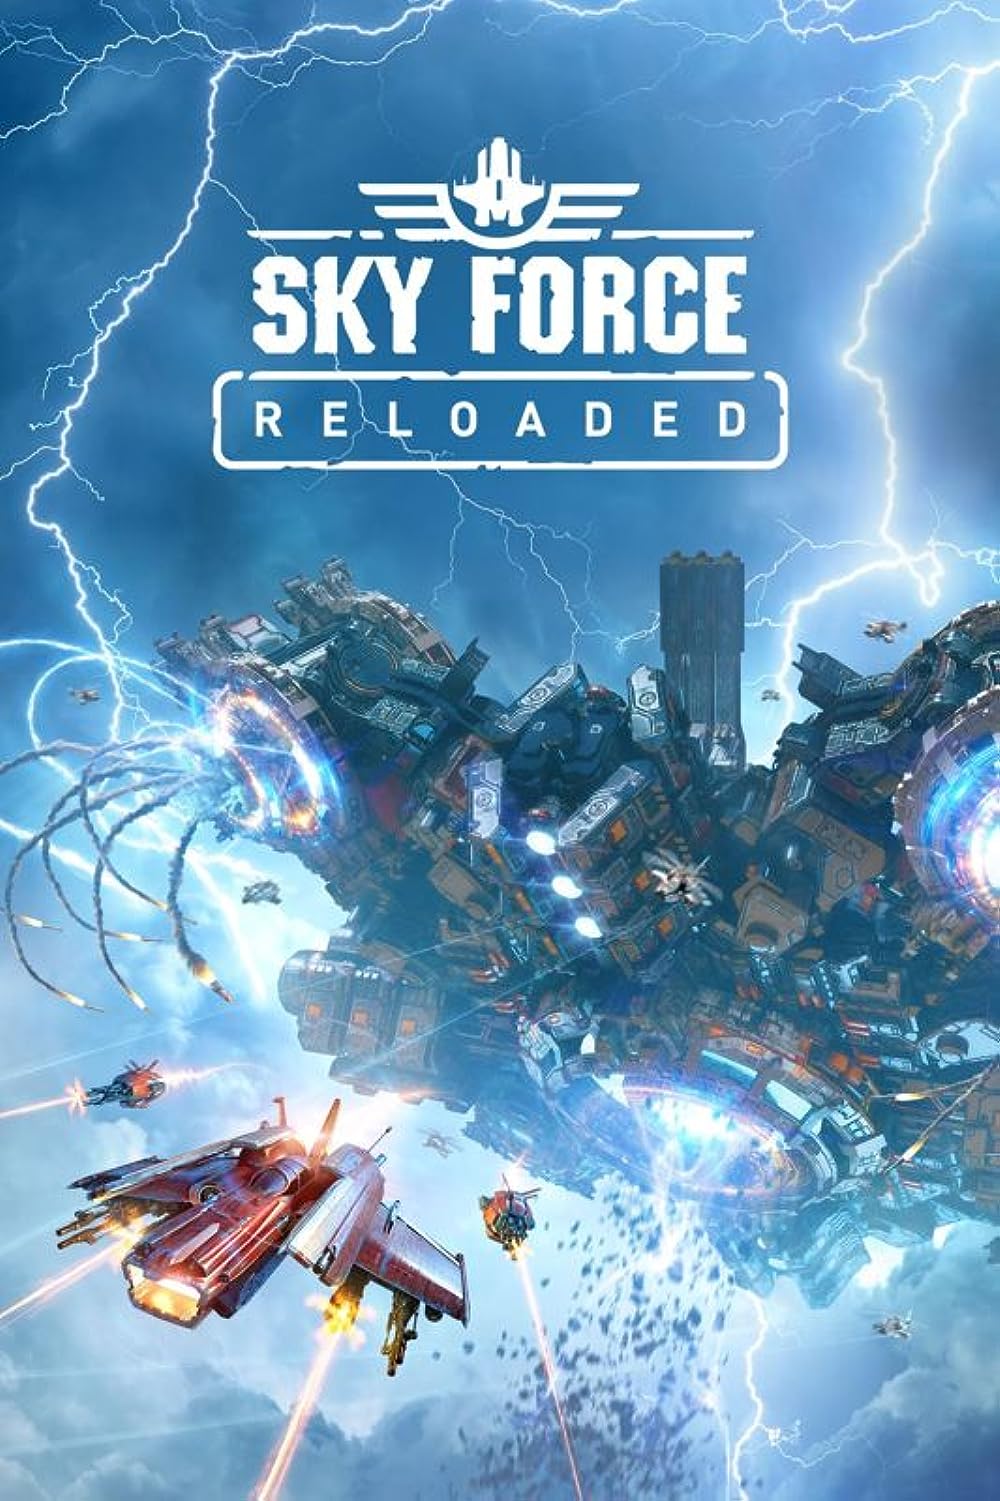 Skyforce Reloaded Multiplayer Android Games